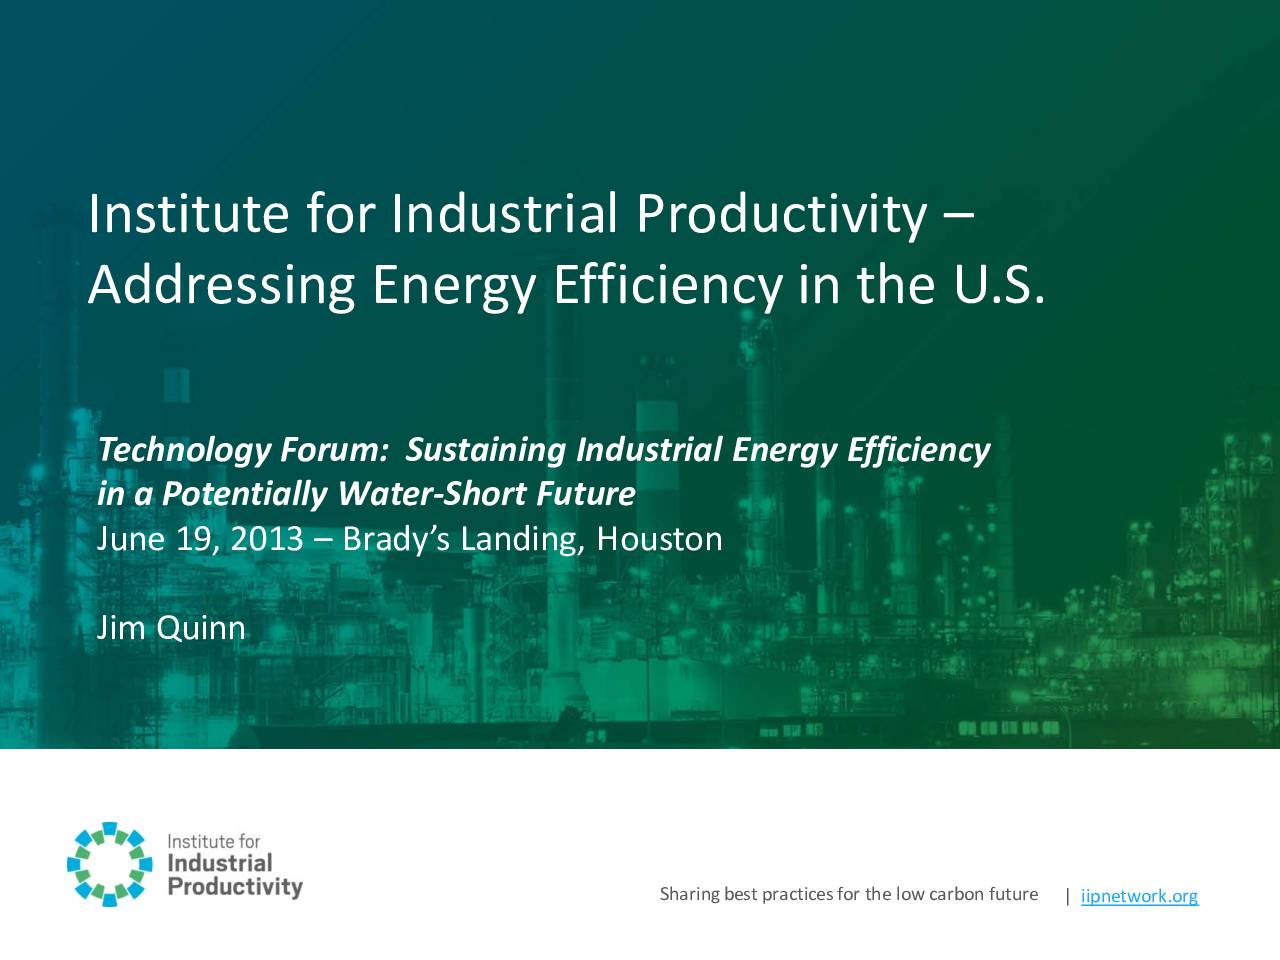 Addressing Energy Efficiency in the U.S.: Technology Forum: Sustaining Industrial Energy Efficiency in a Potentially Water-Short Future